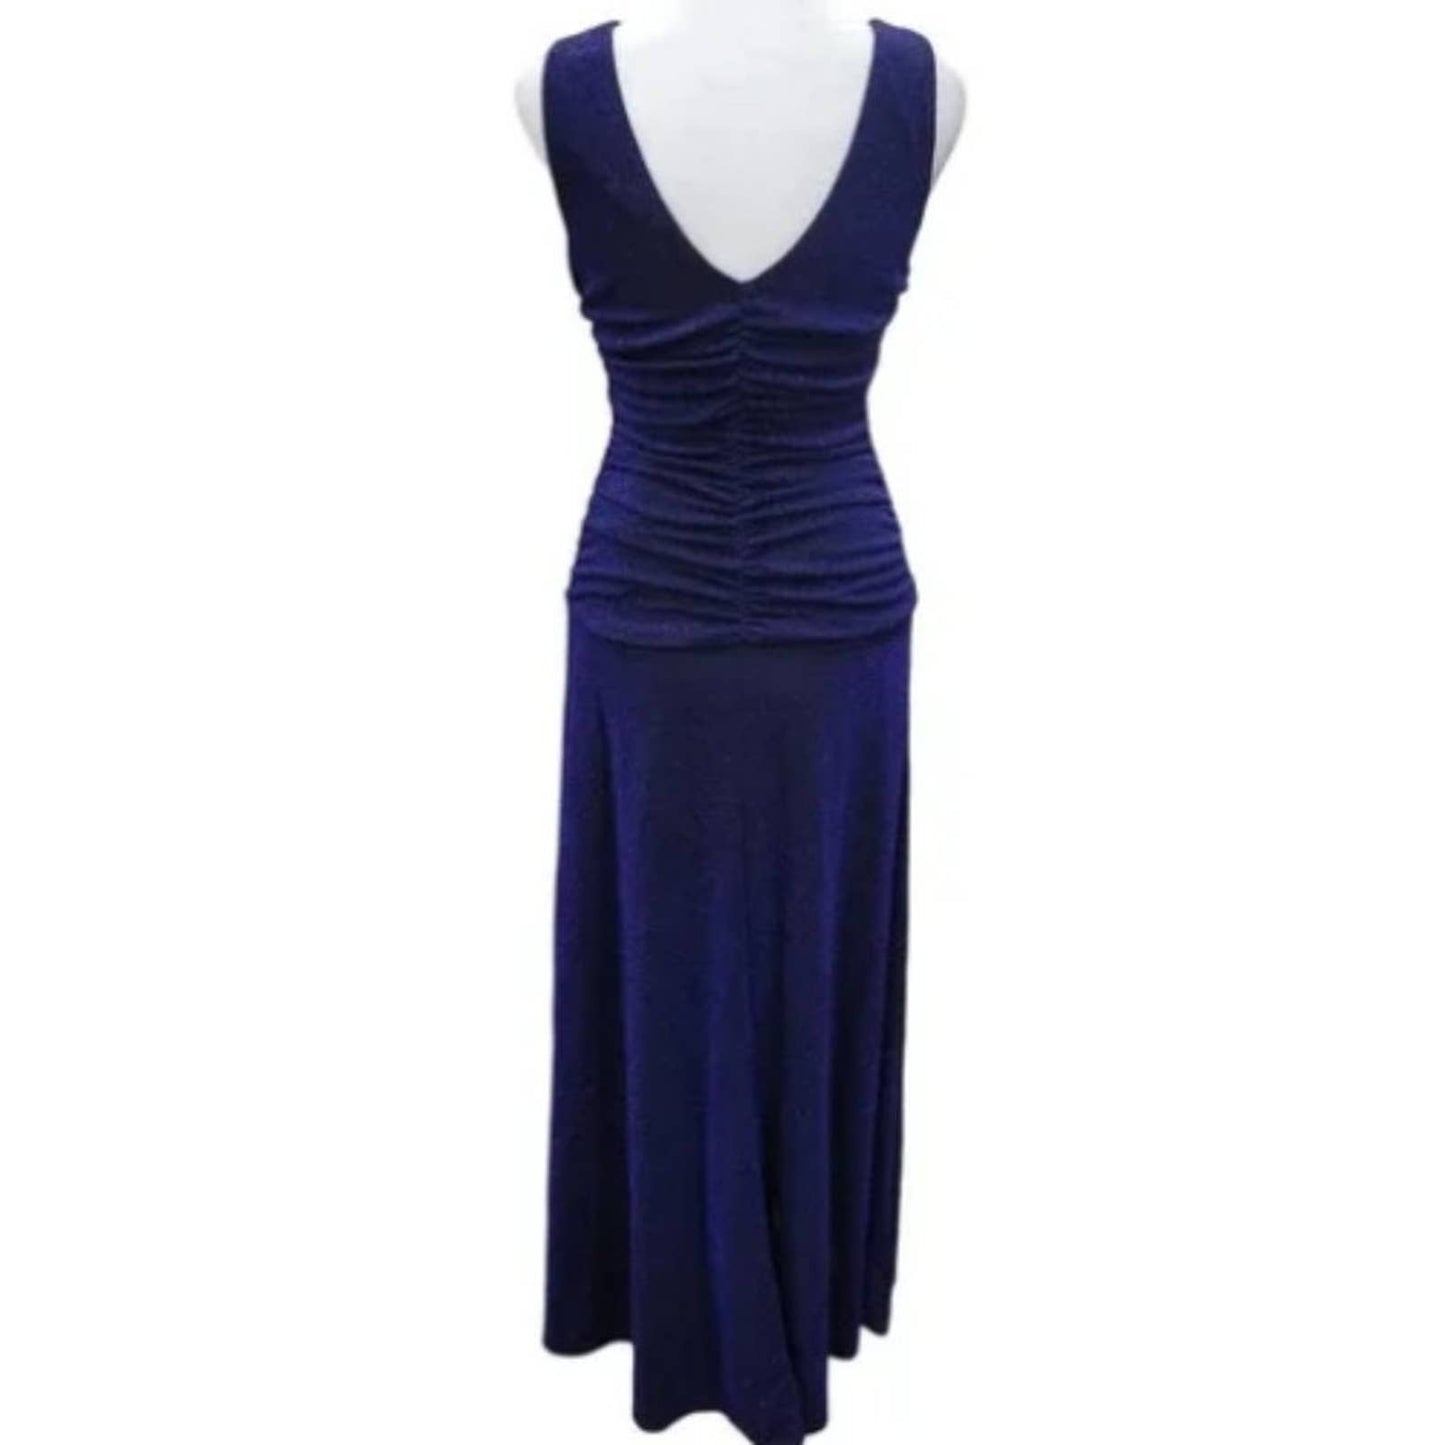 Nightway Navy Blue Ruched Formal Gown Mother of the Bride NWT Size 10